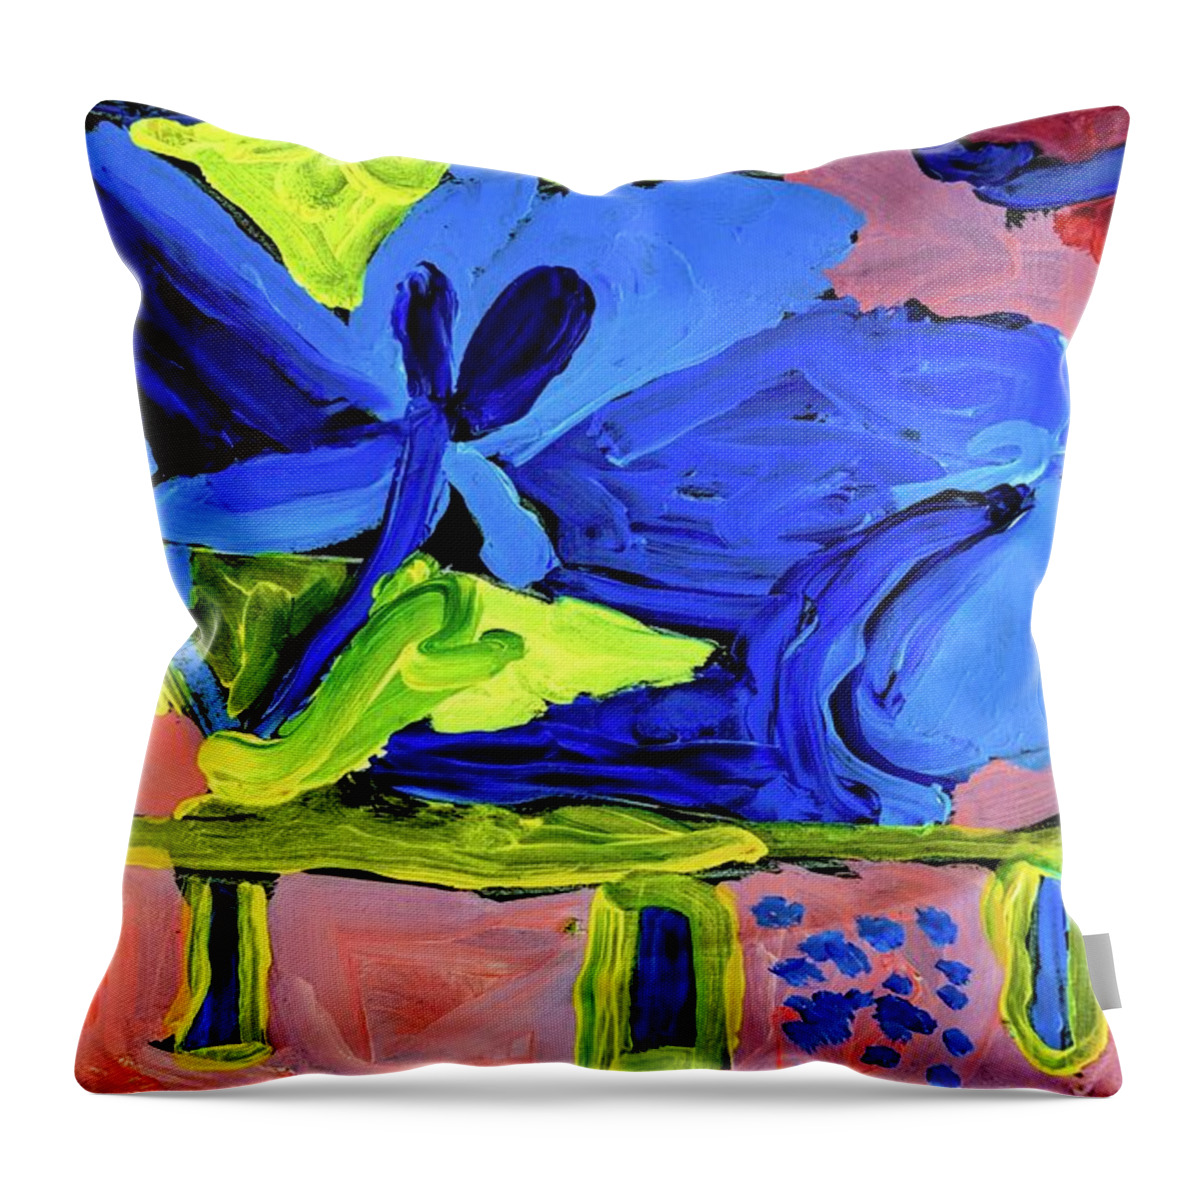 Flower Throw Pillow featuring the painting The Very Big Flower by Abigail White